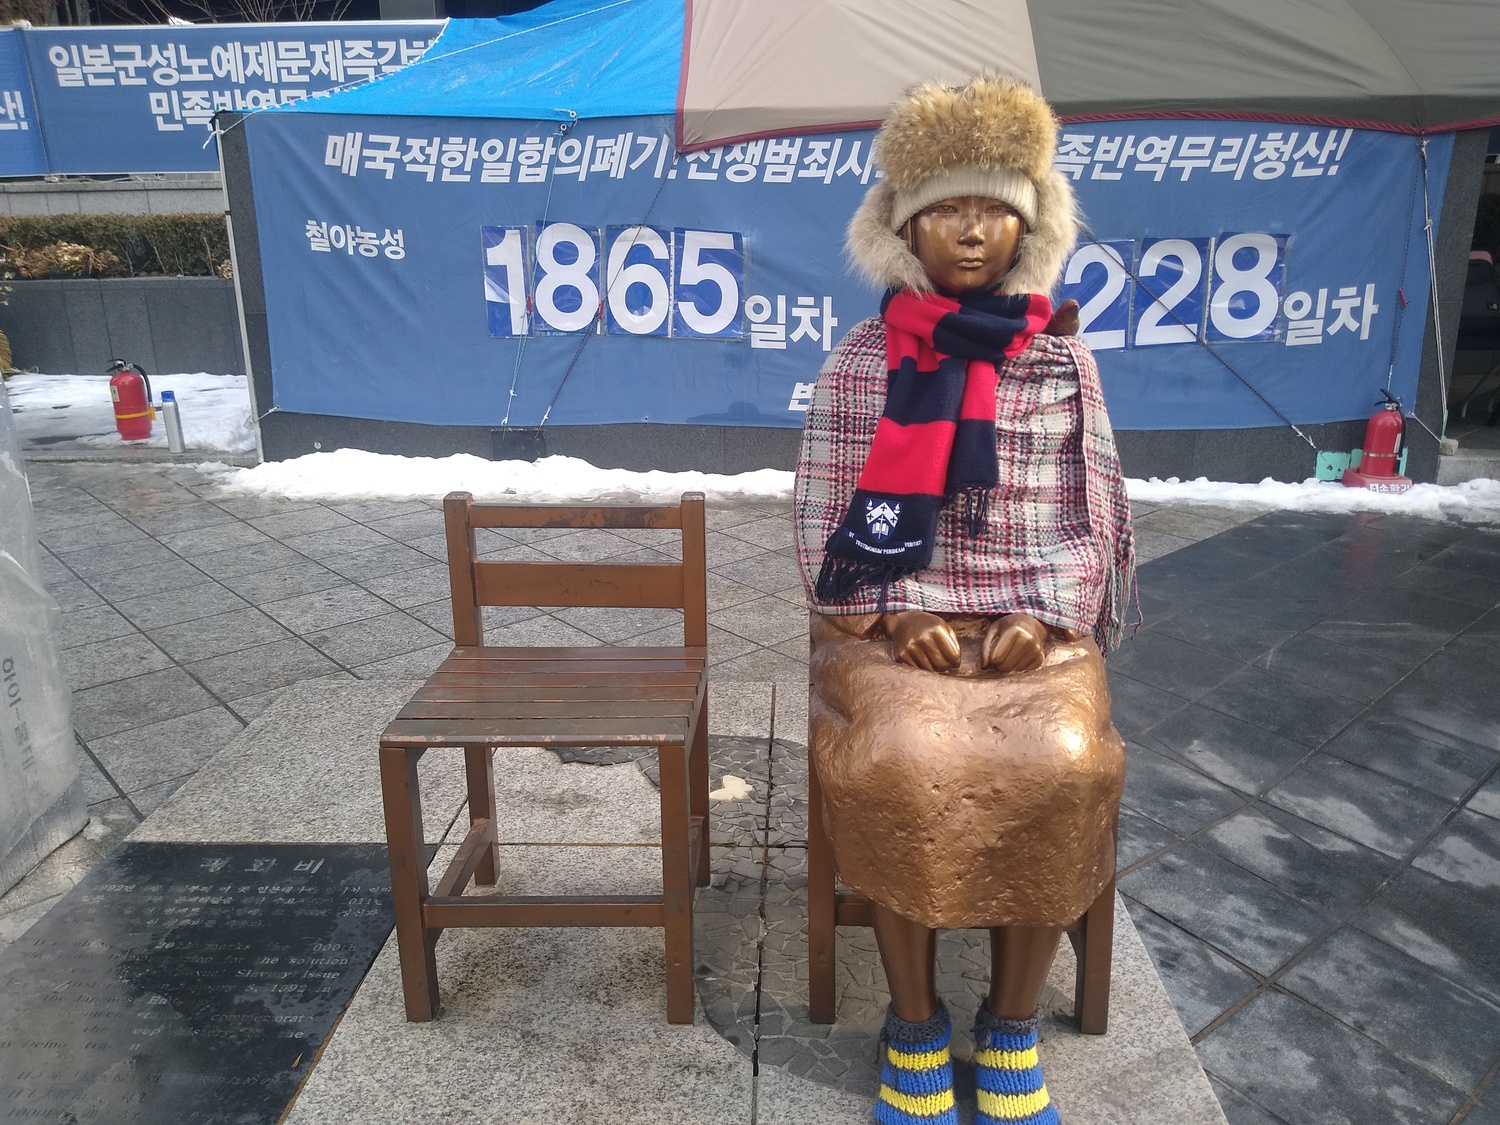 The Statue of Peace in front of the former Japanese Embassy in Seoul, South Korea commemorates comfort women, sex slaves taken by the Imperial Japanese Army during World War II. The slogans on the tarp behind the statue demand the Japanese government to make reparations.